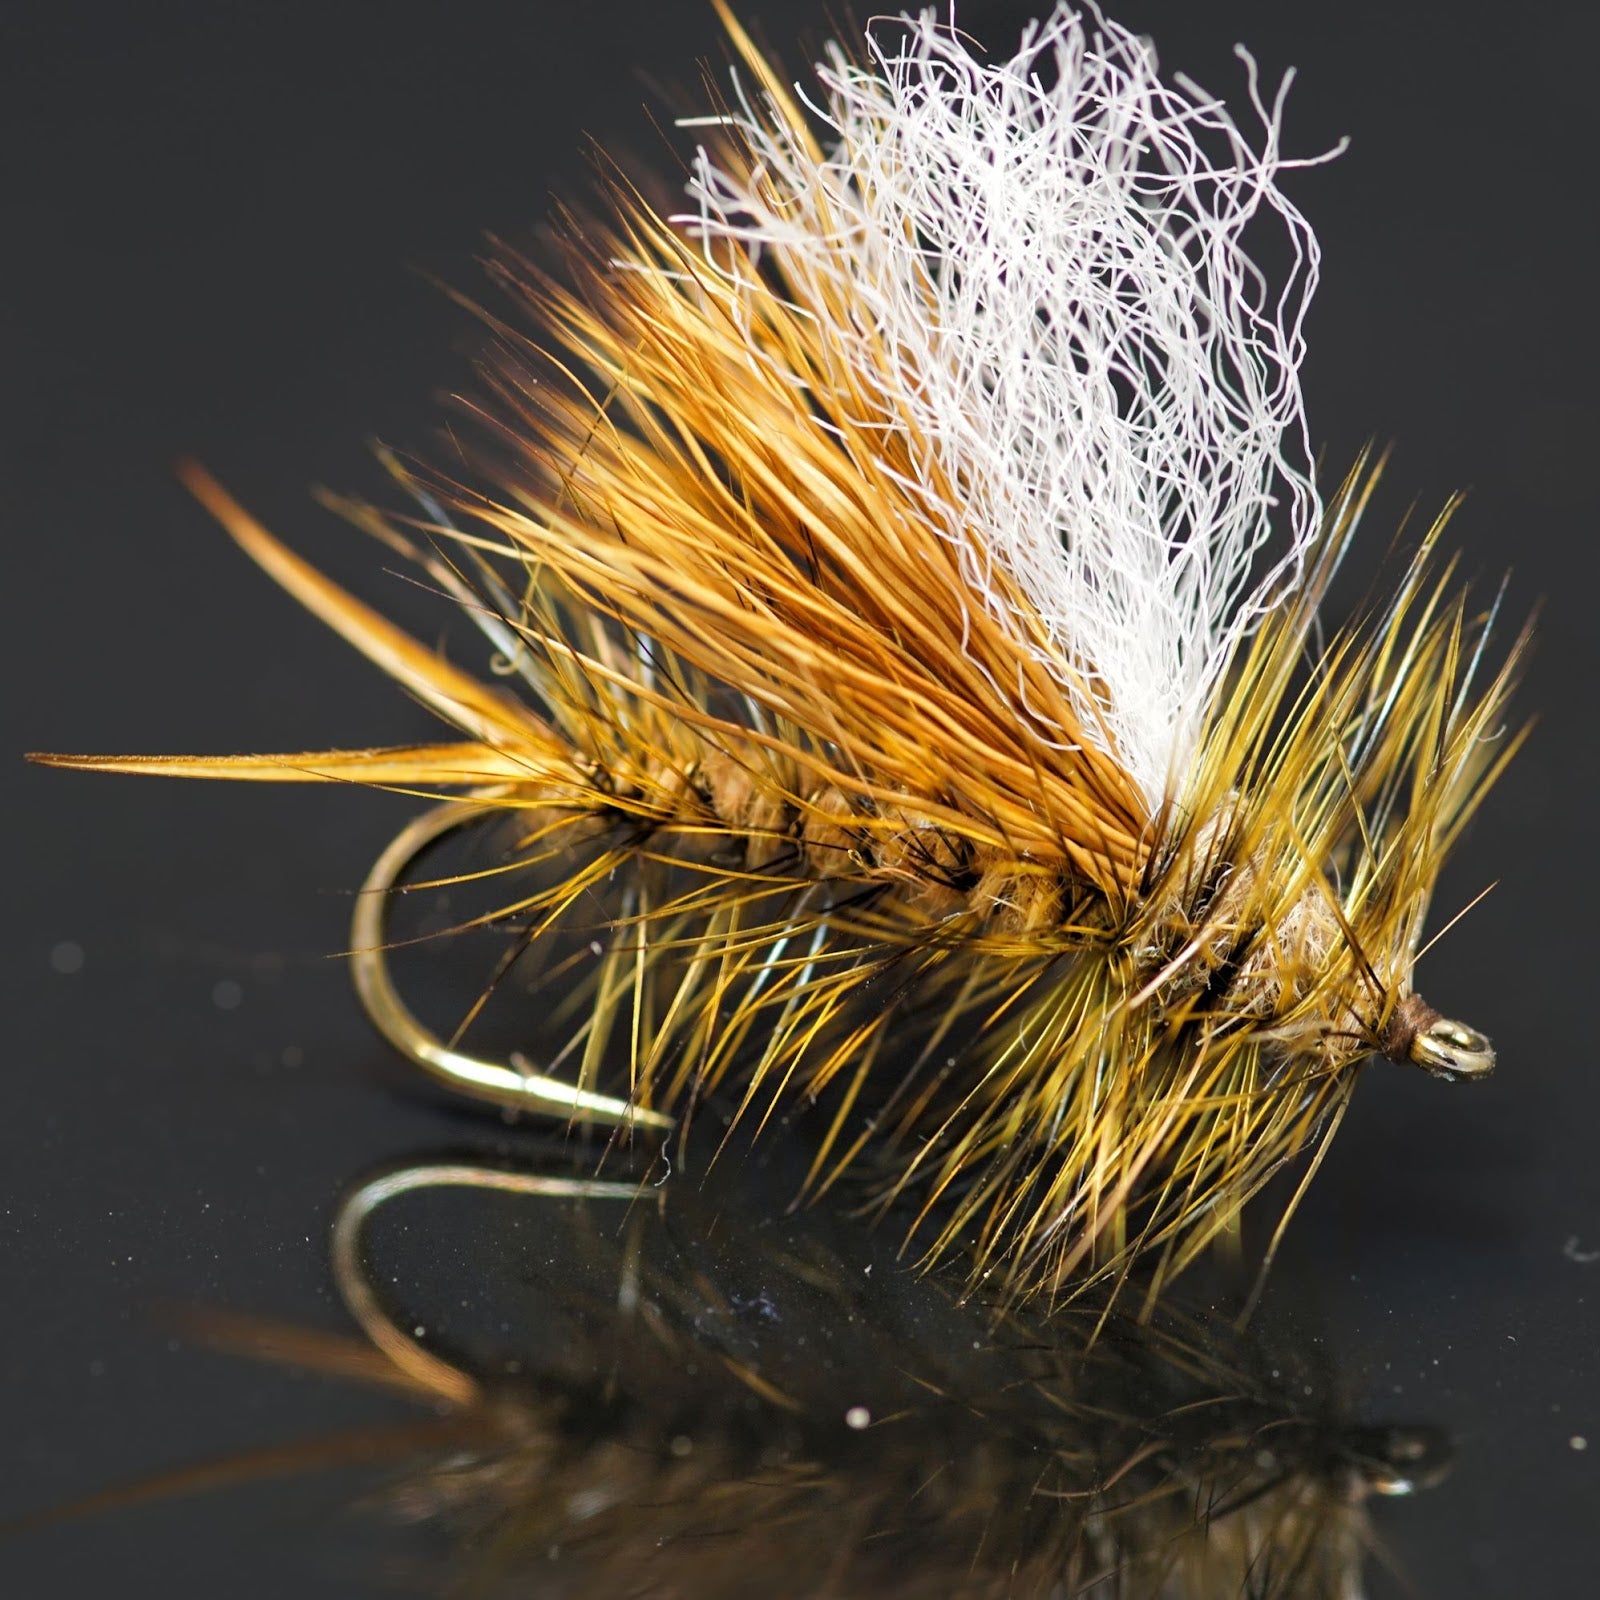 The Royal Stimulator Fly. A Beginner's Guide: How to tie the…